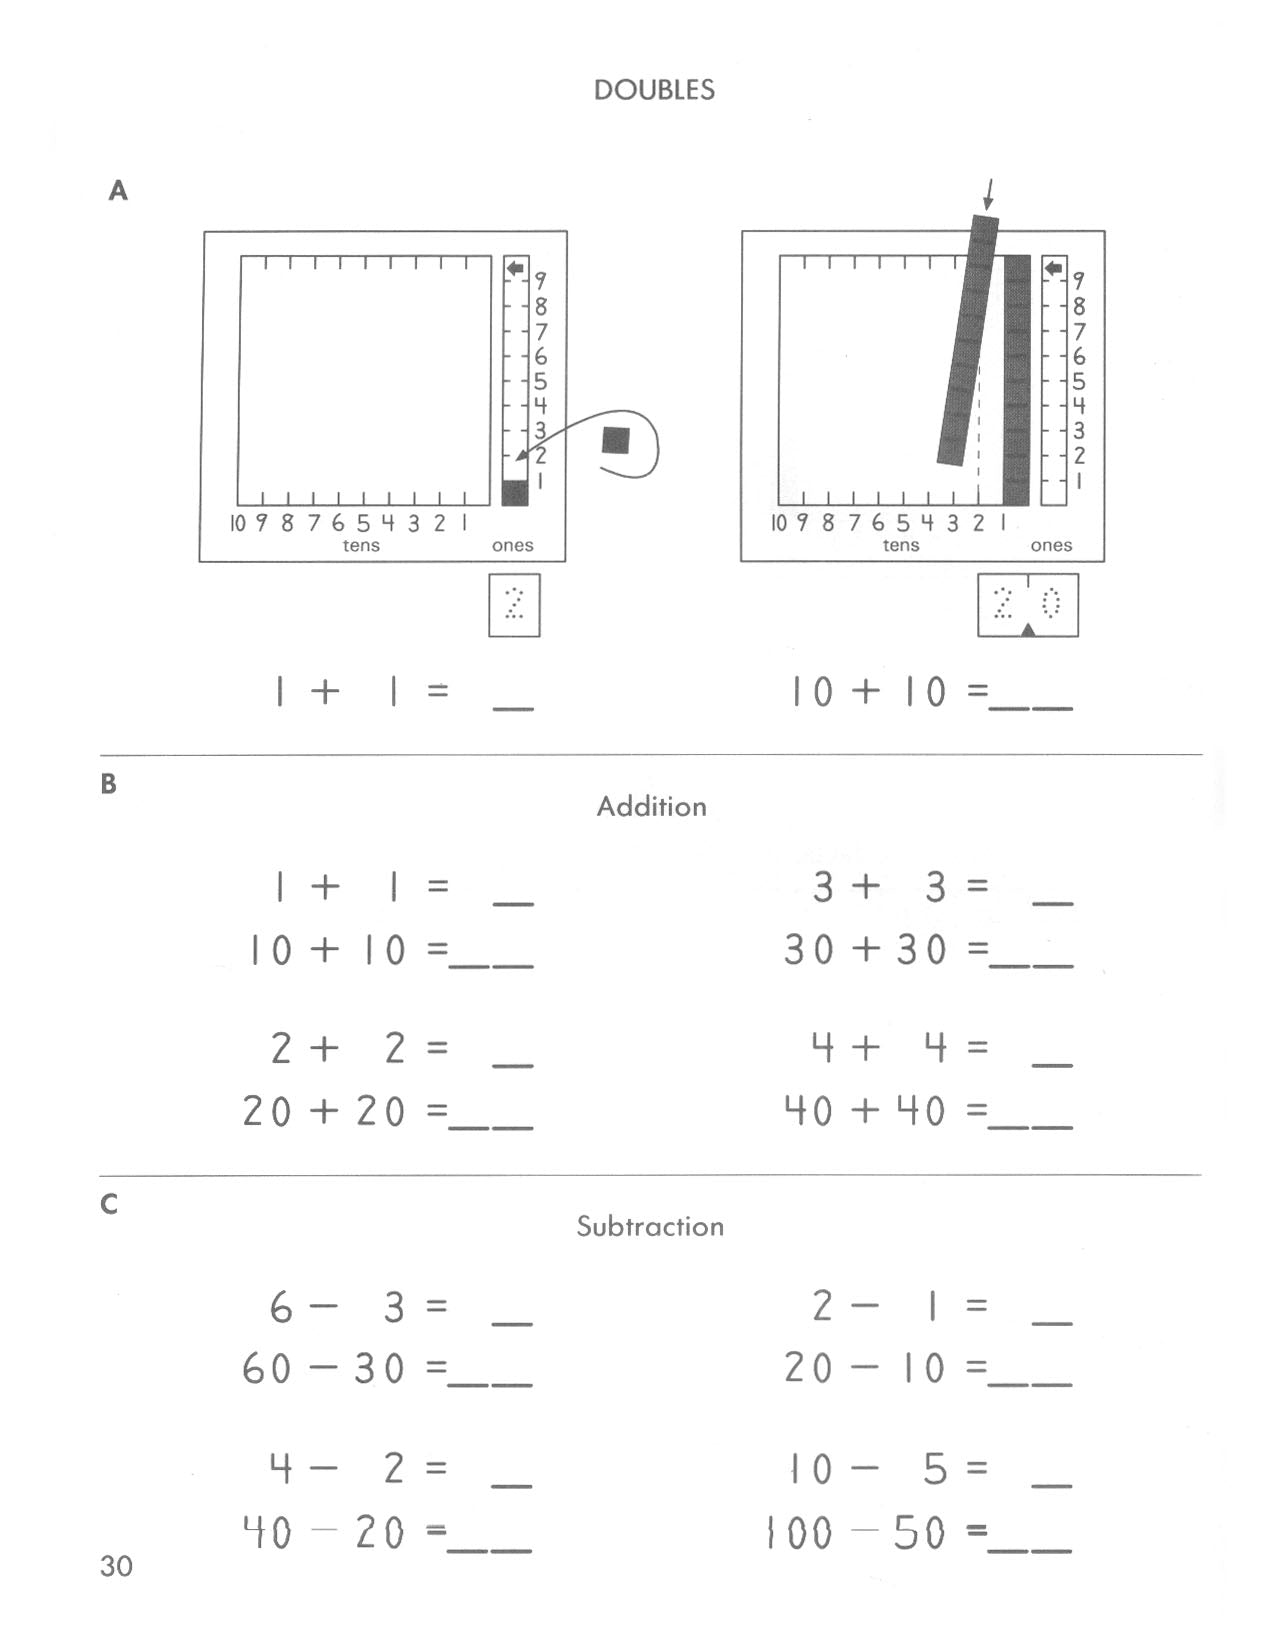 Structural Arithmetic II: Student Workbook